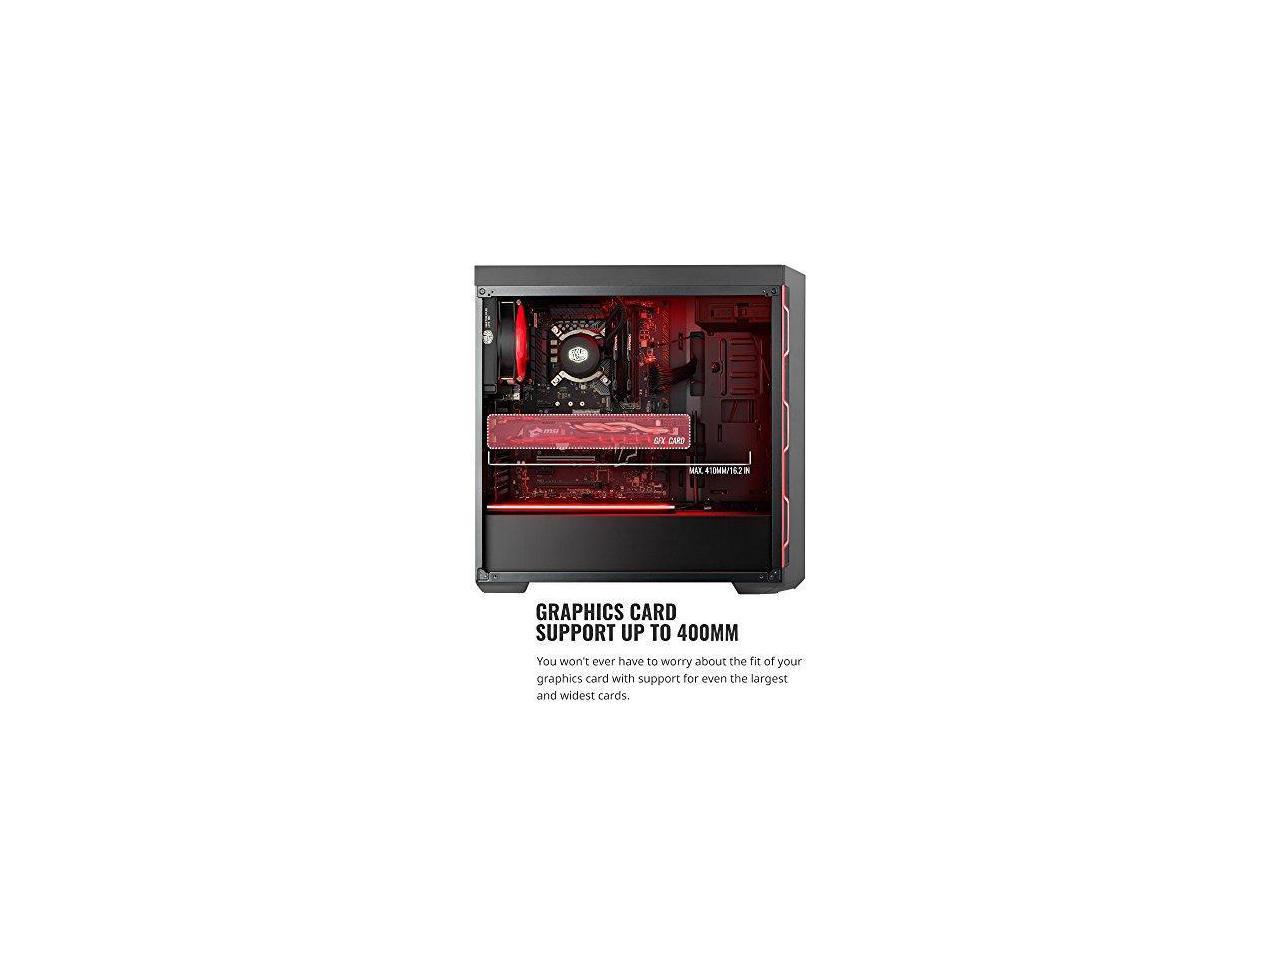 Cooler Master Mcb B600l Ka5n S00 Masterbox Mb600l Mid Tower Computer Case Atx Micro Atx Mini Itx Supported Sleek Design With Red Side Trim And Acrylic Side Panel Newegg Com